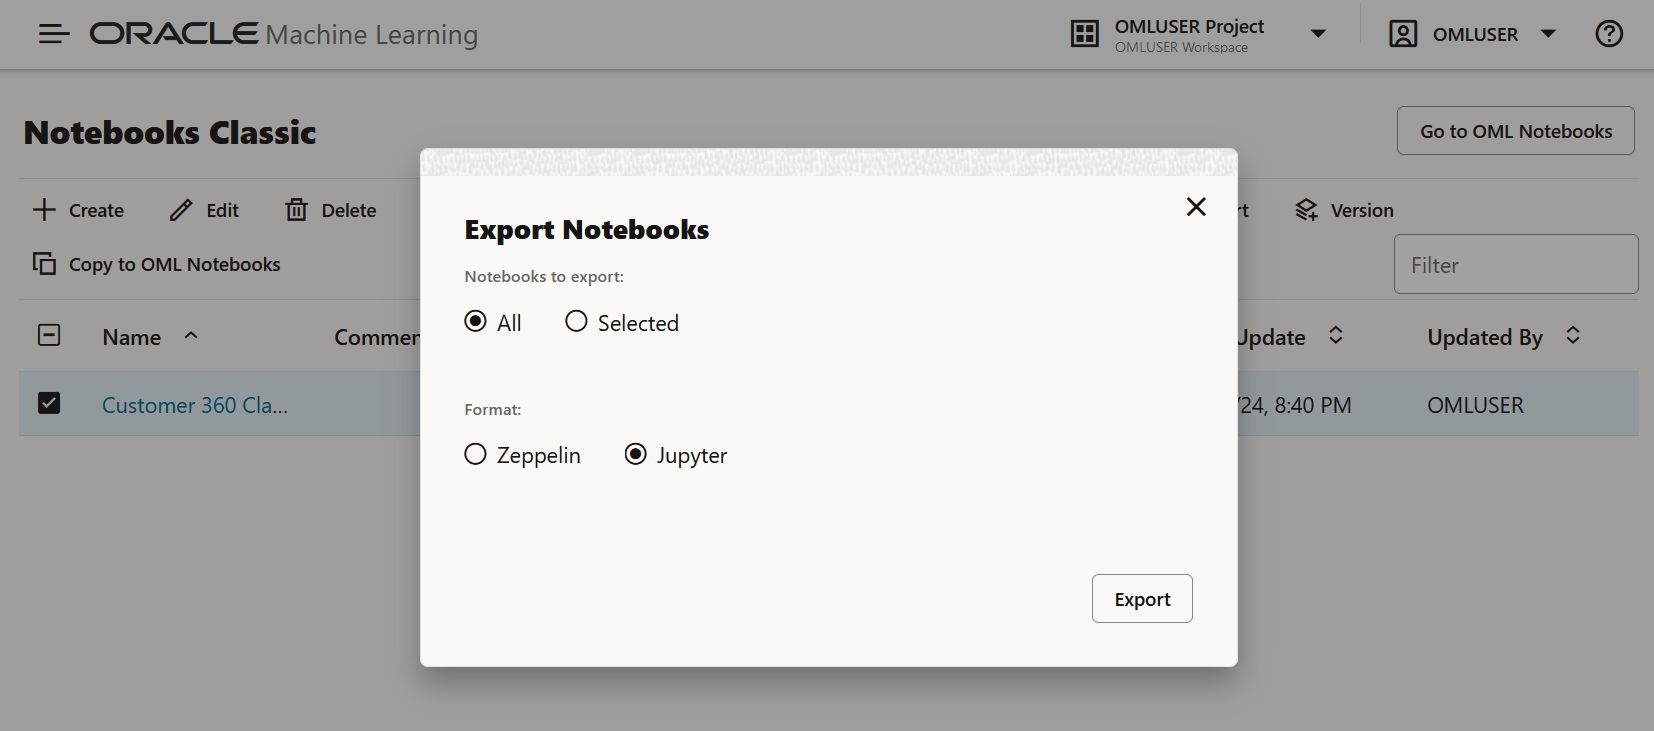 Supported Notebook Formats for Export